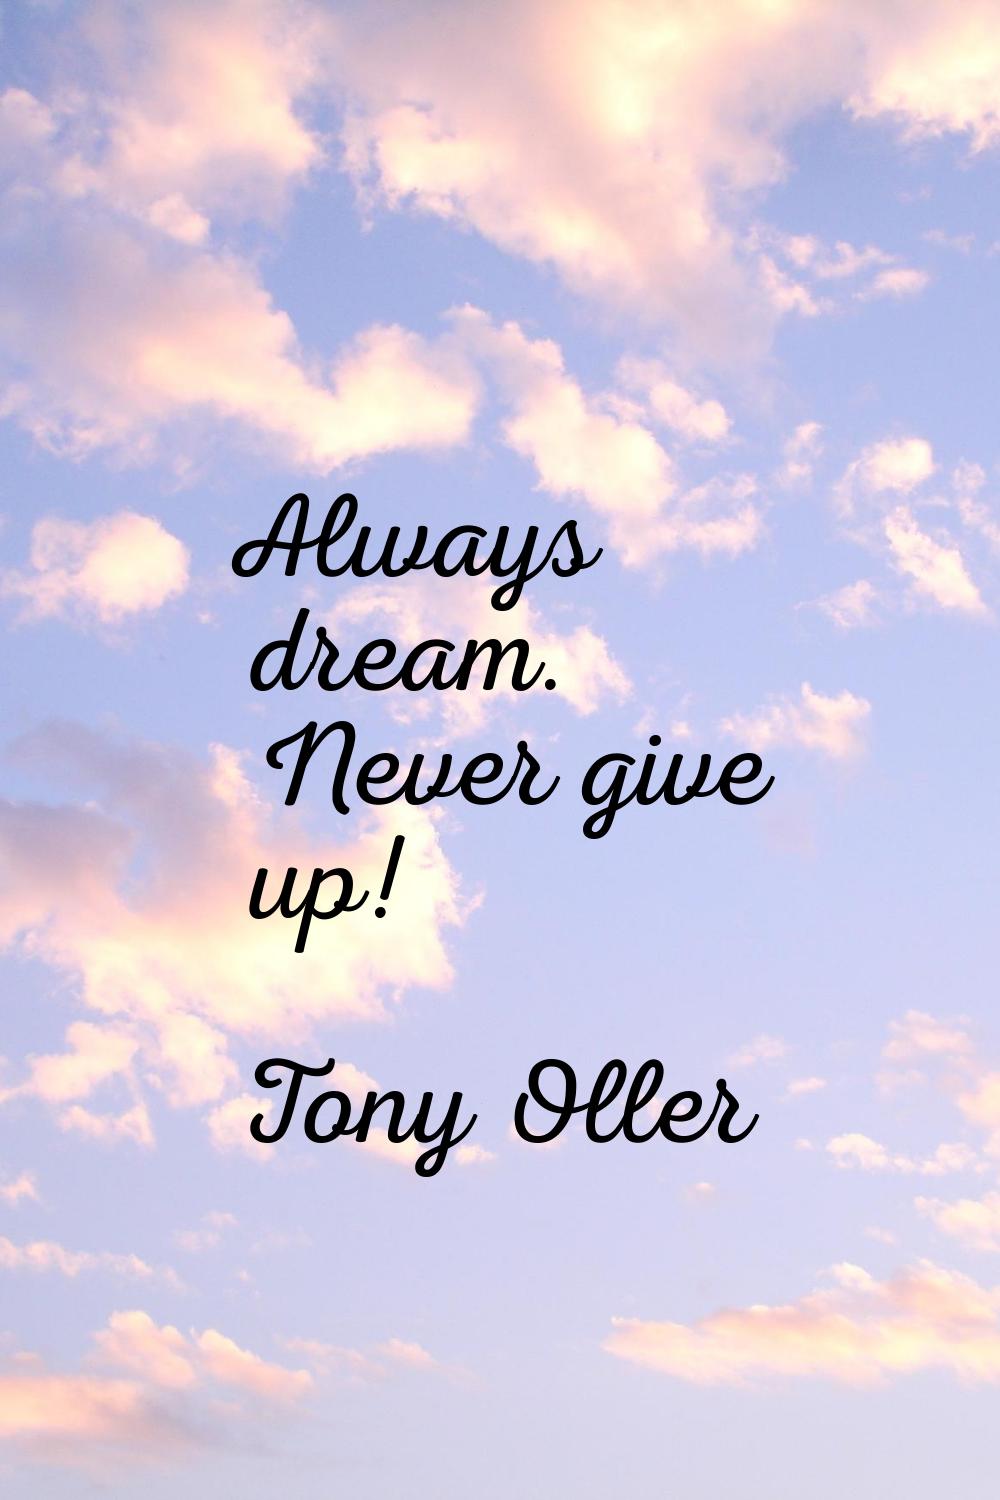 Always dream. Never give up!